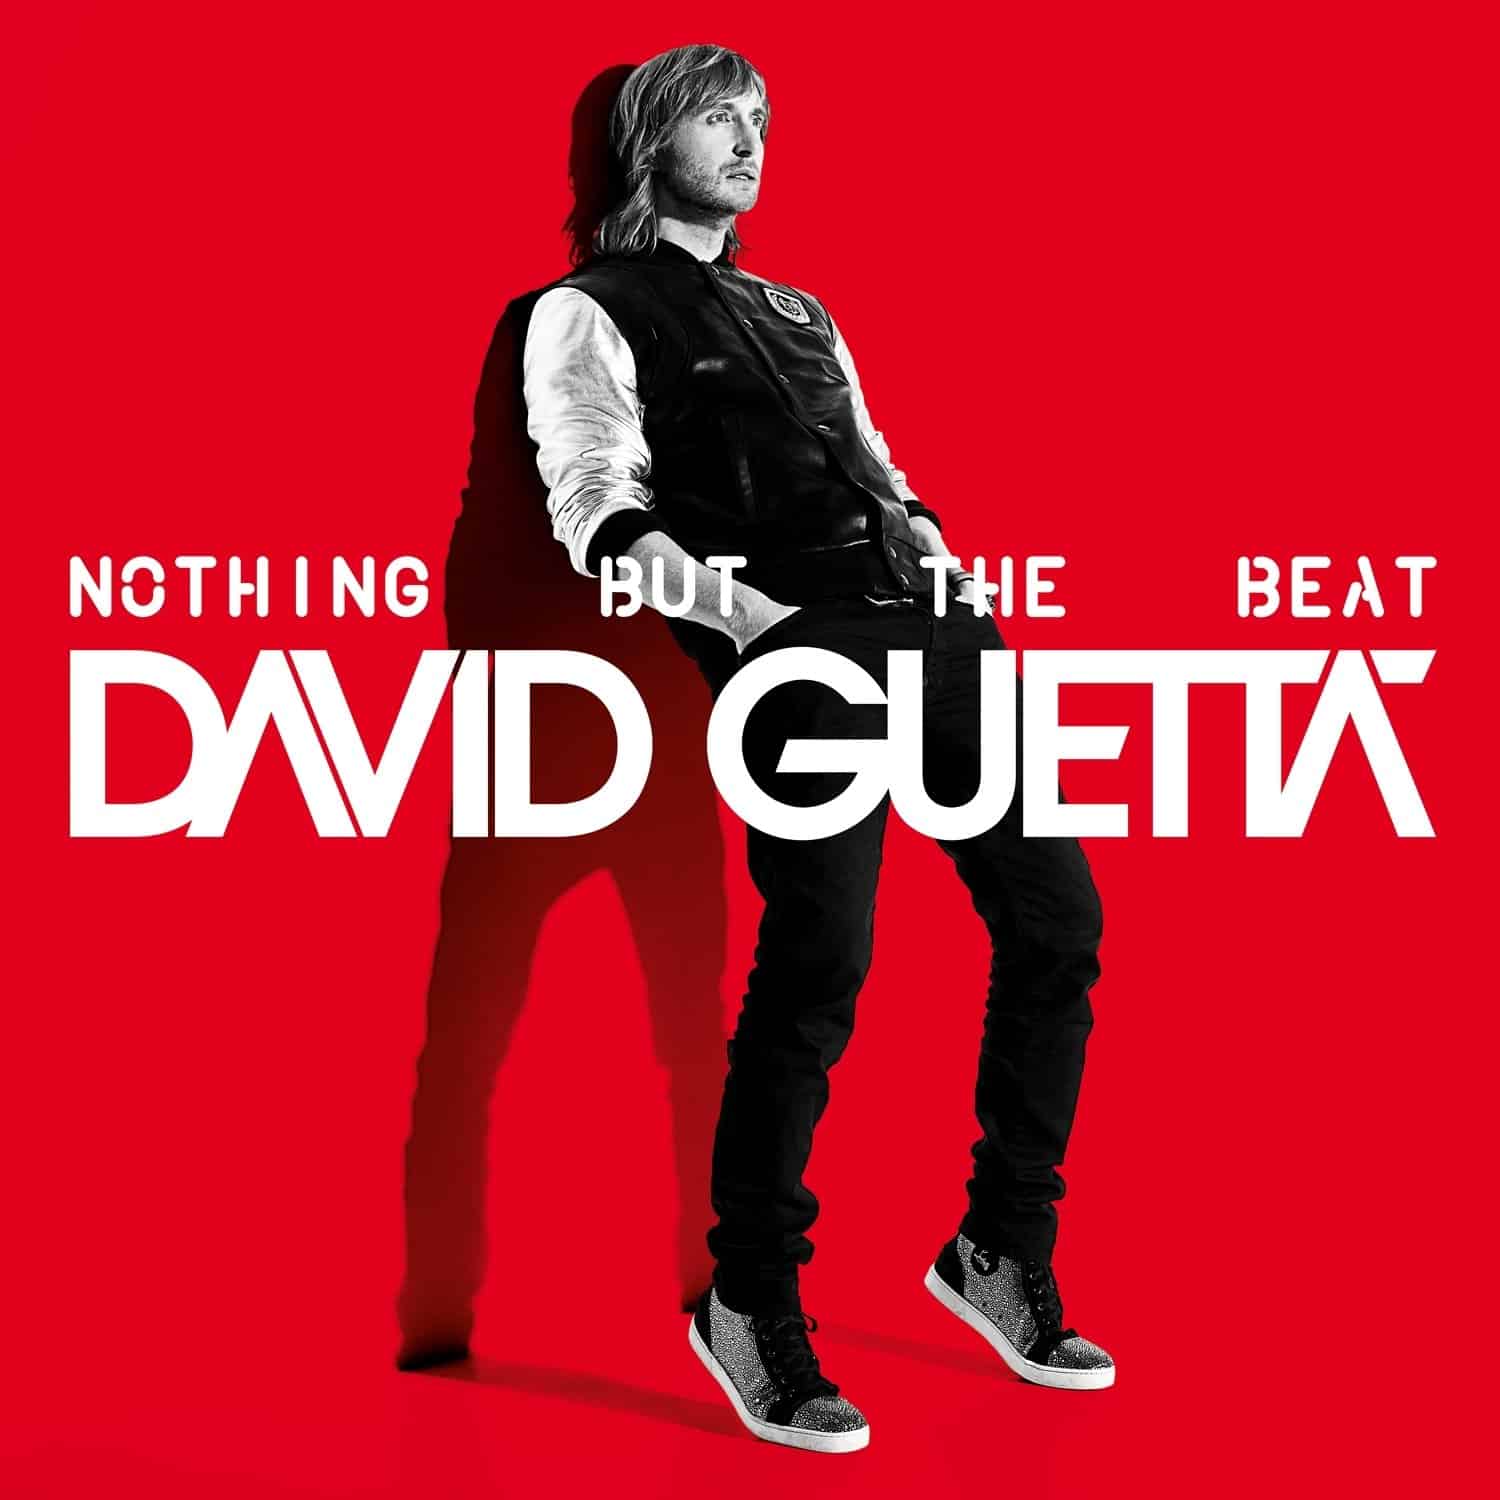 David Guetta – Nothing But the Beat